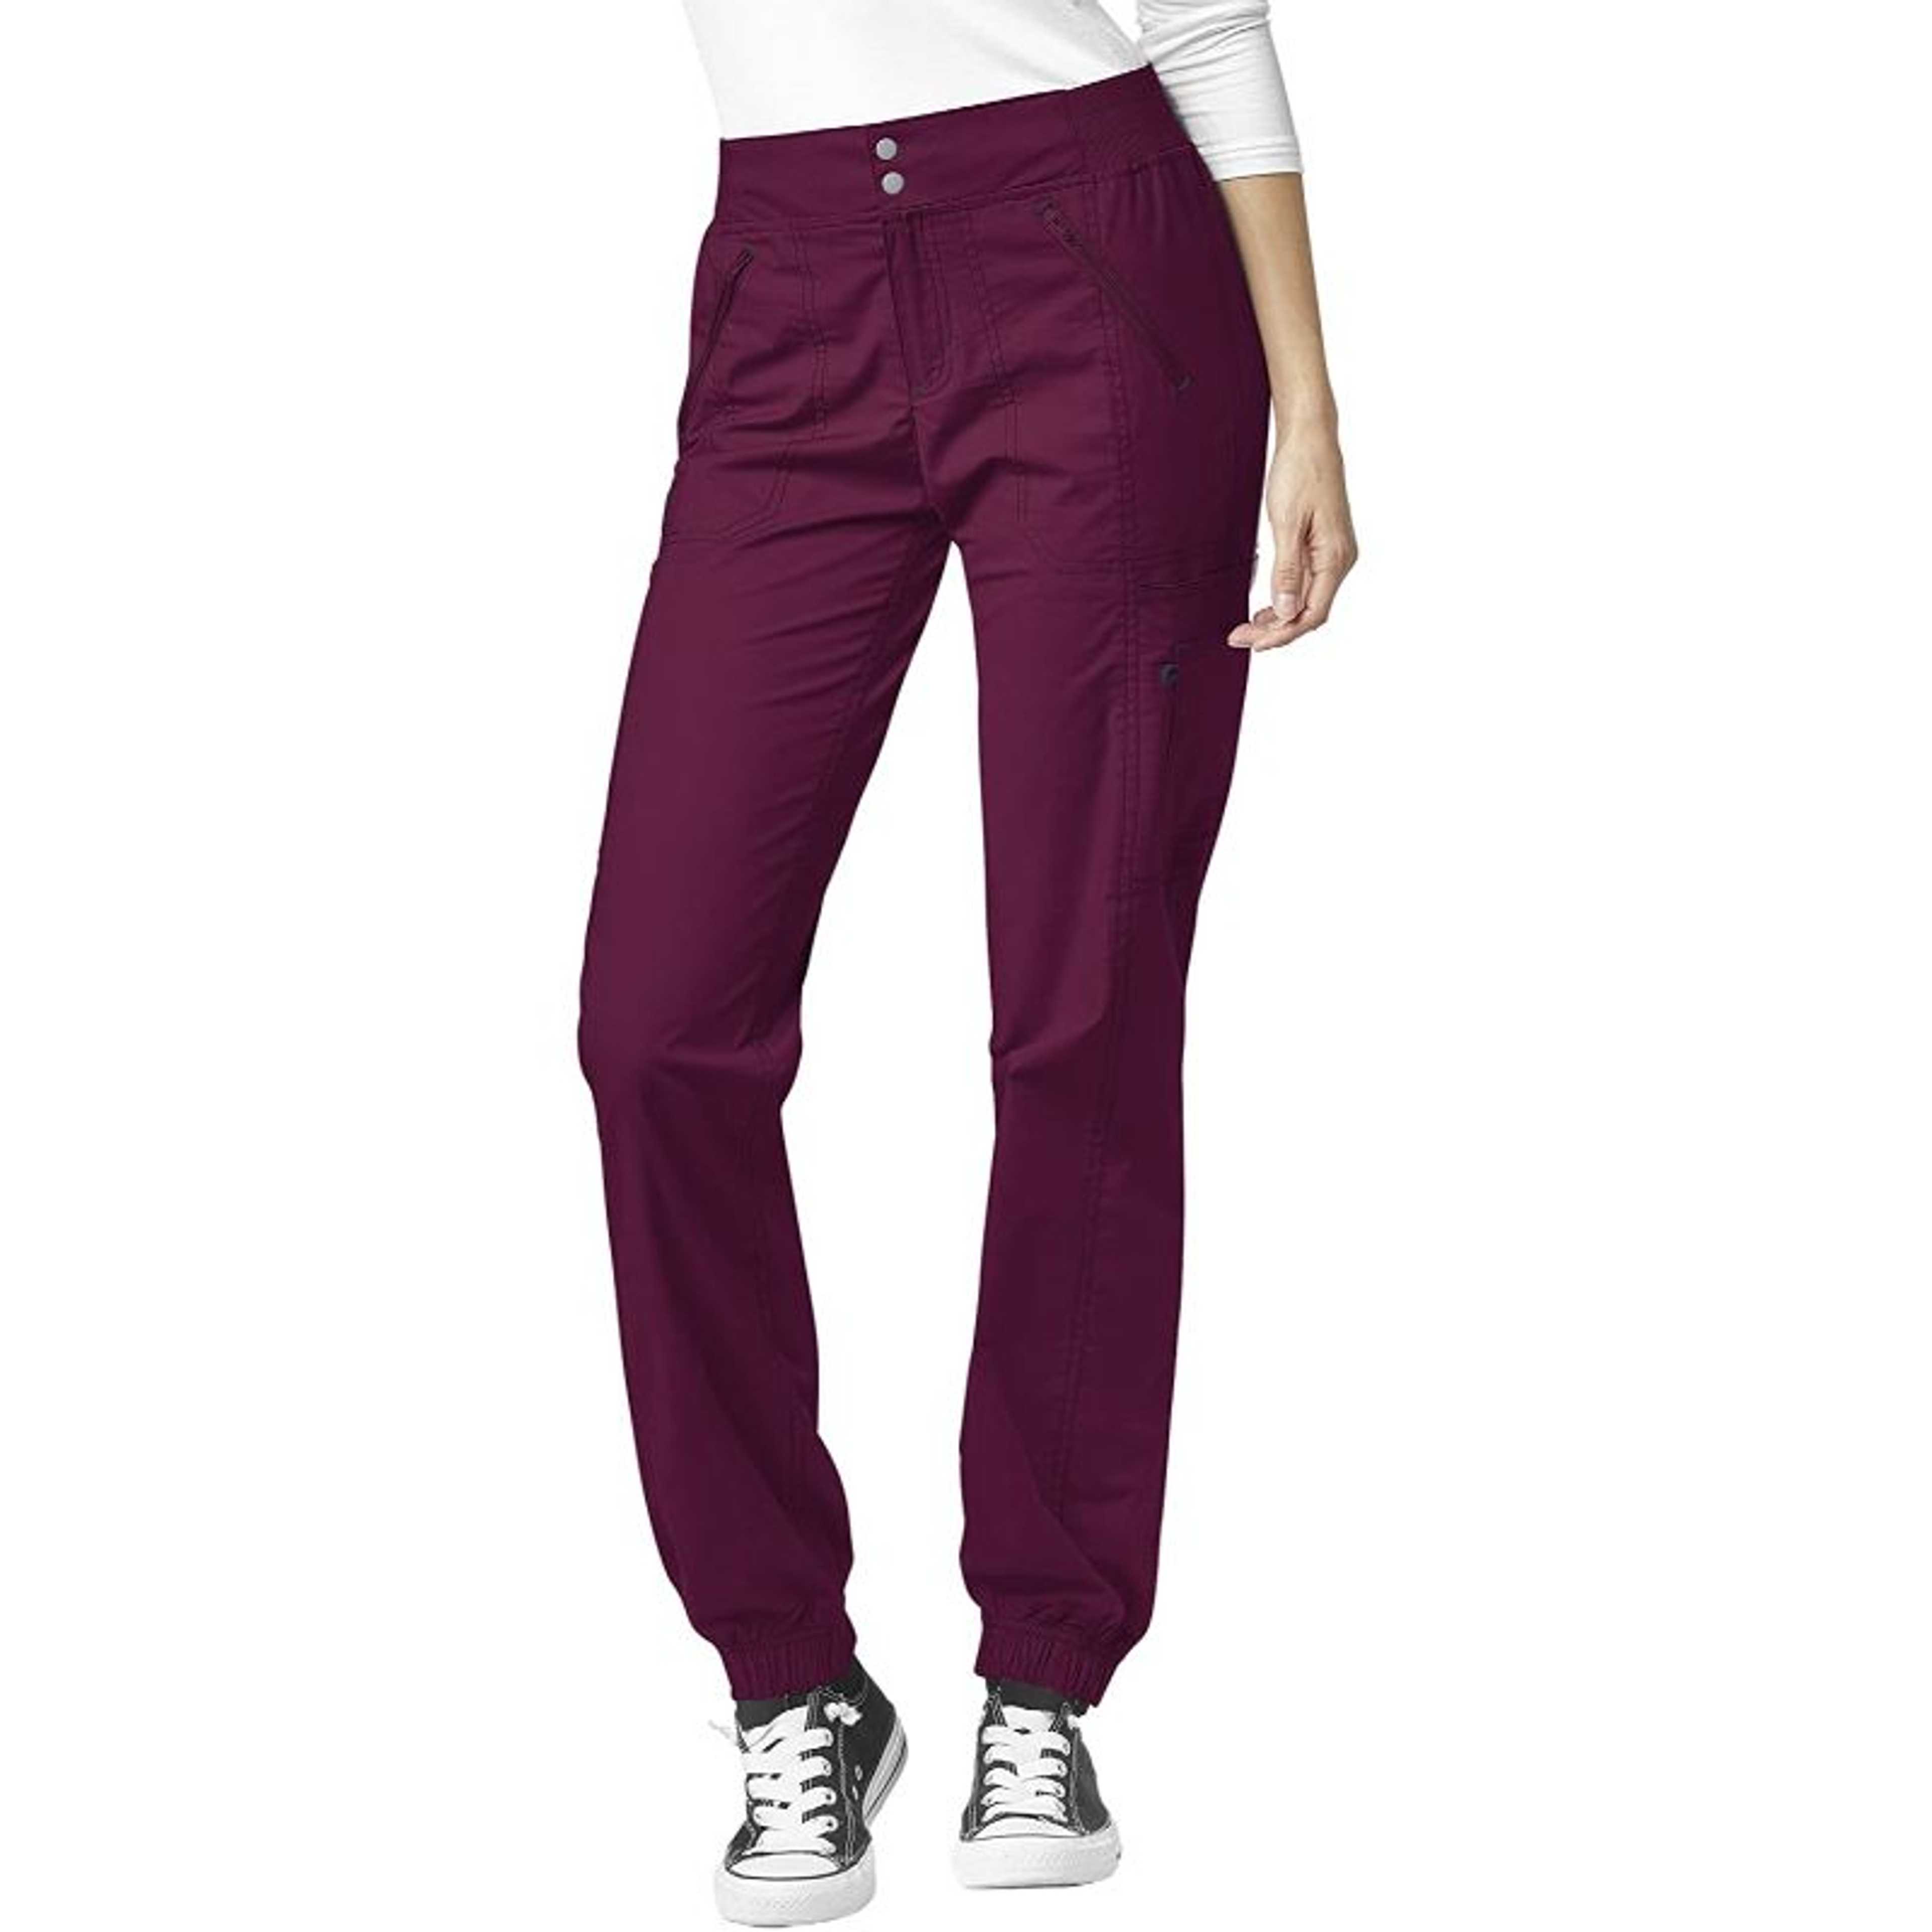 Red Rubahas Womens Cargo Trousers Ladies Trousers Jeans Pants